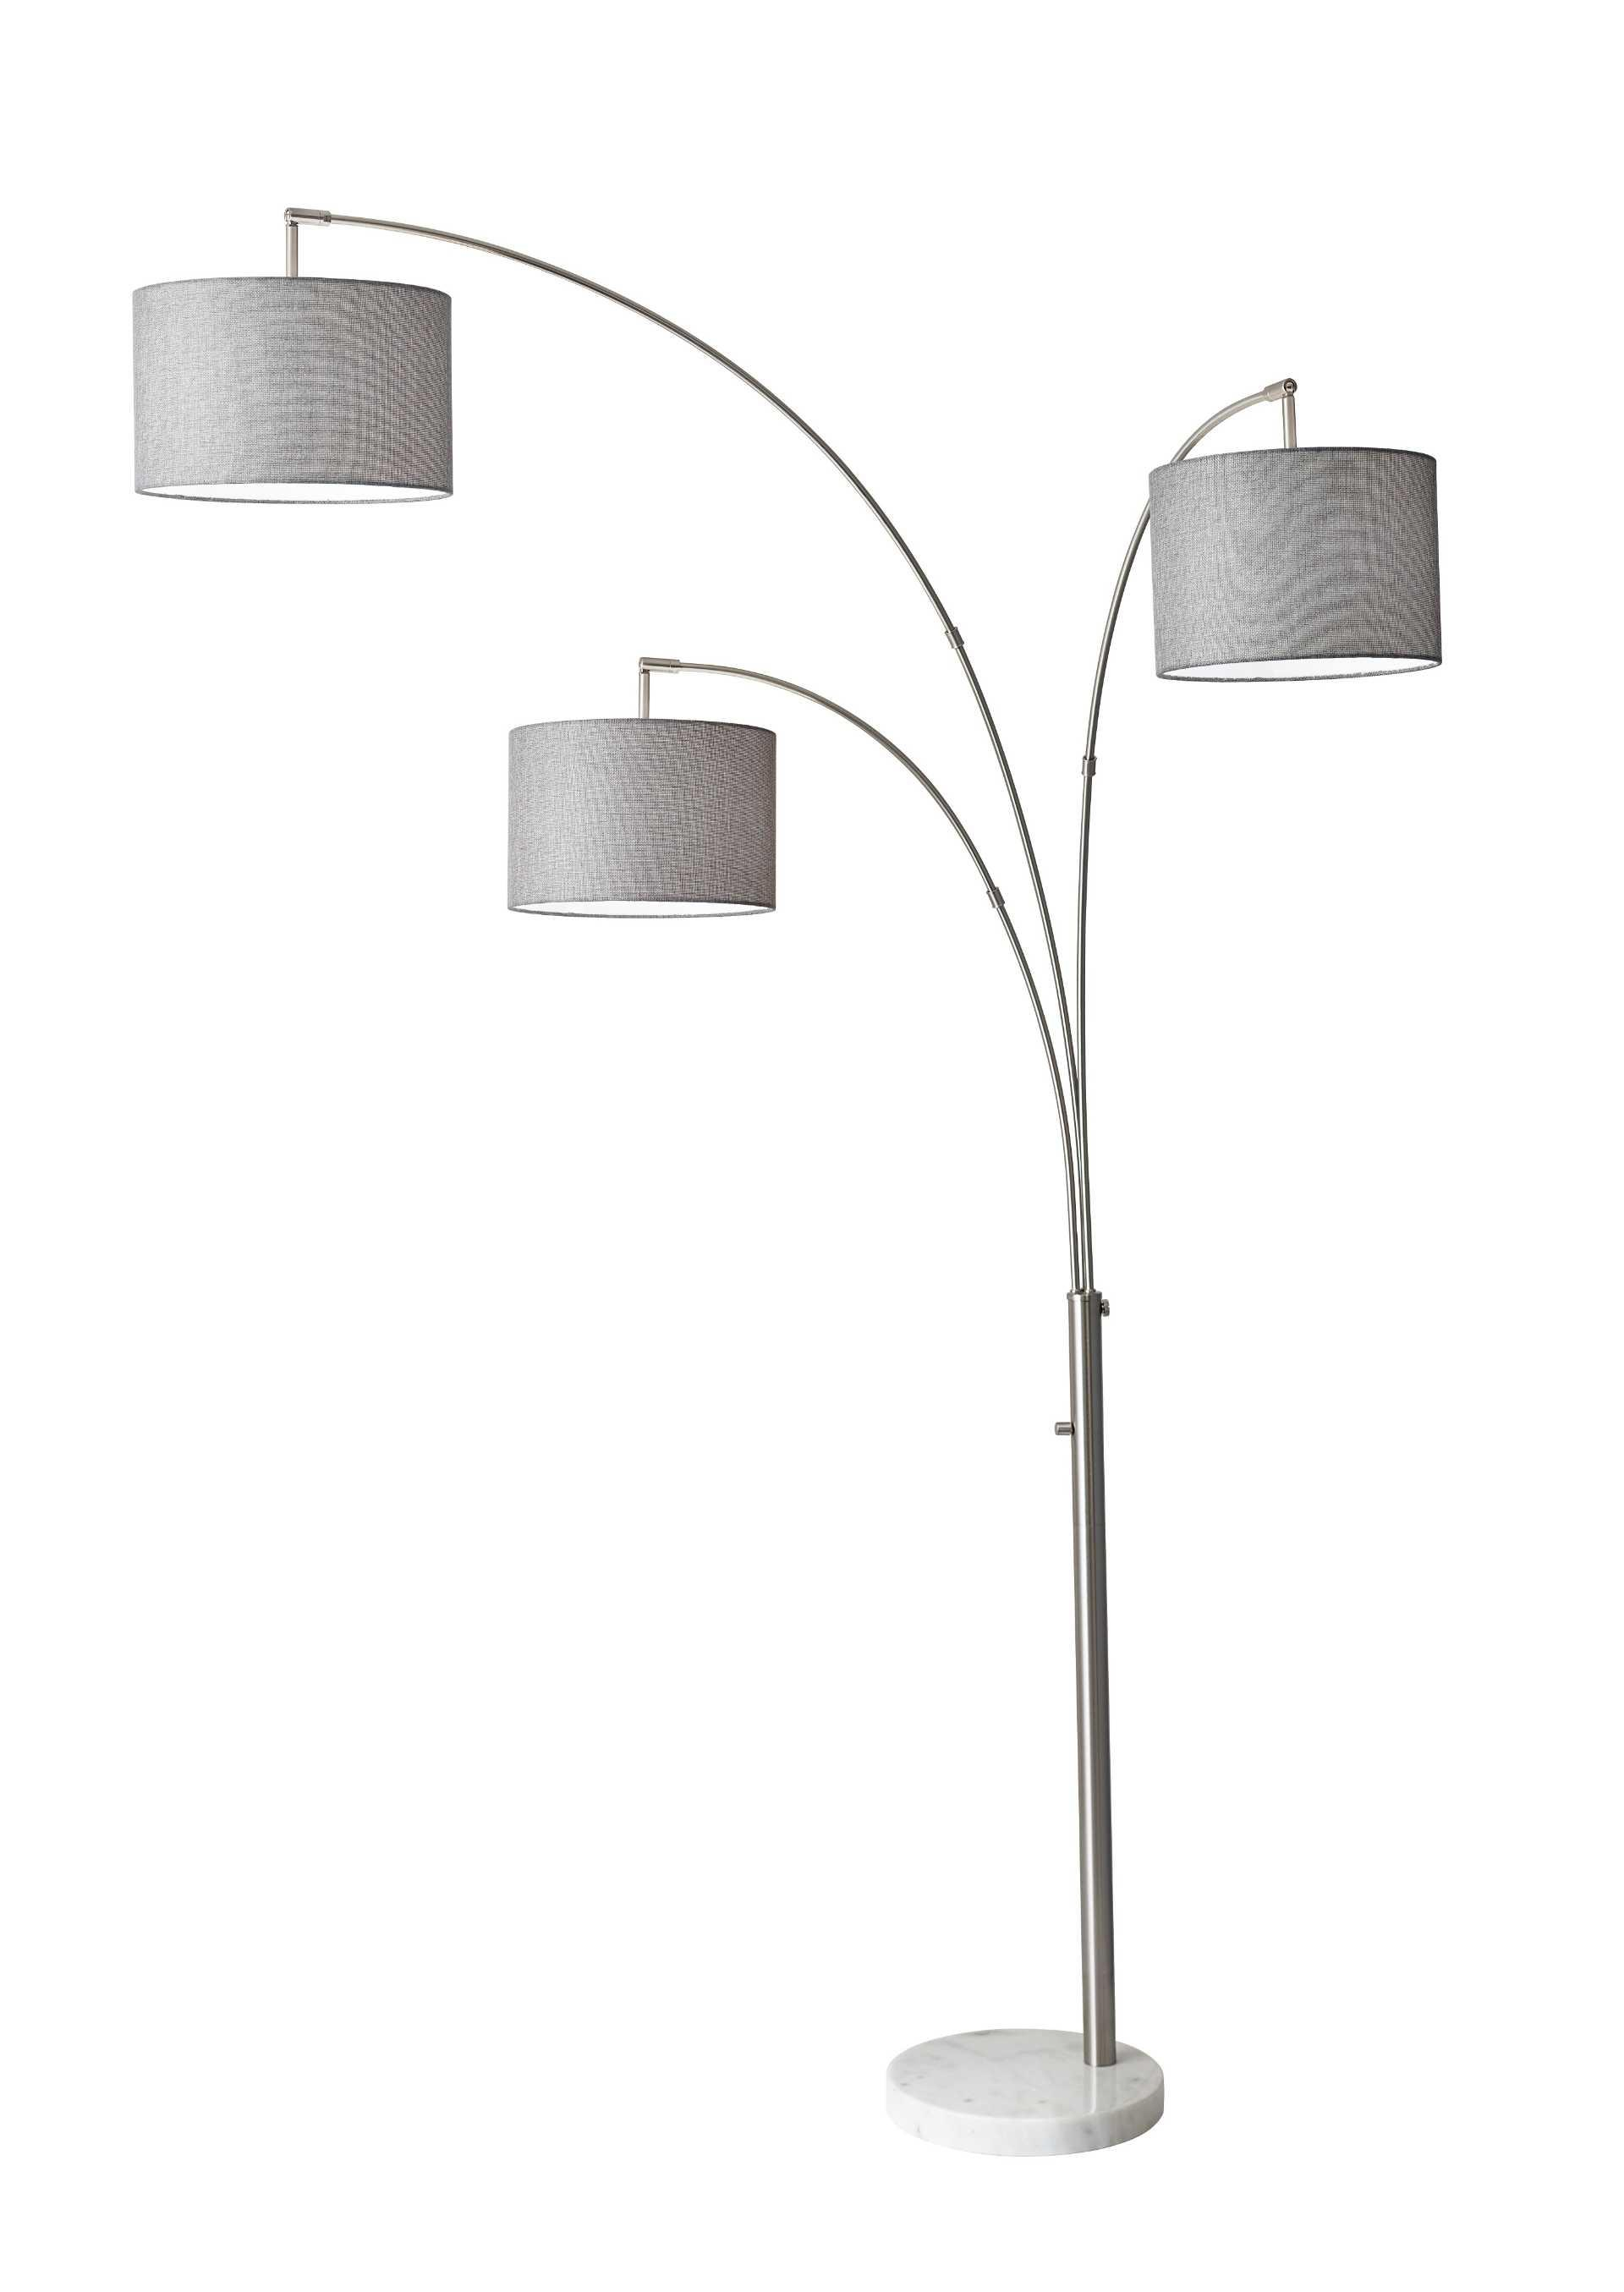 Attractive 3 Arm Arc Floor Lamp Modern Design Models throughout size 1920 X 2710